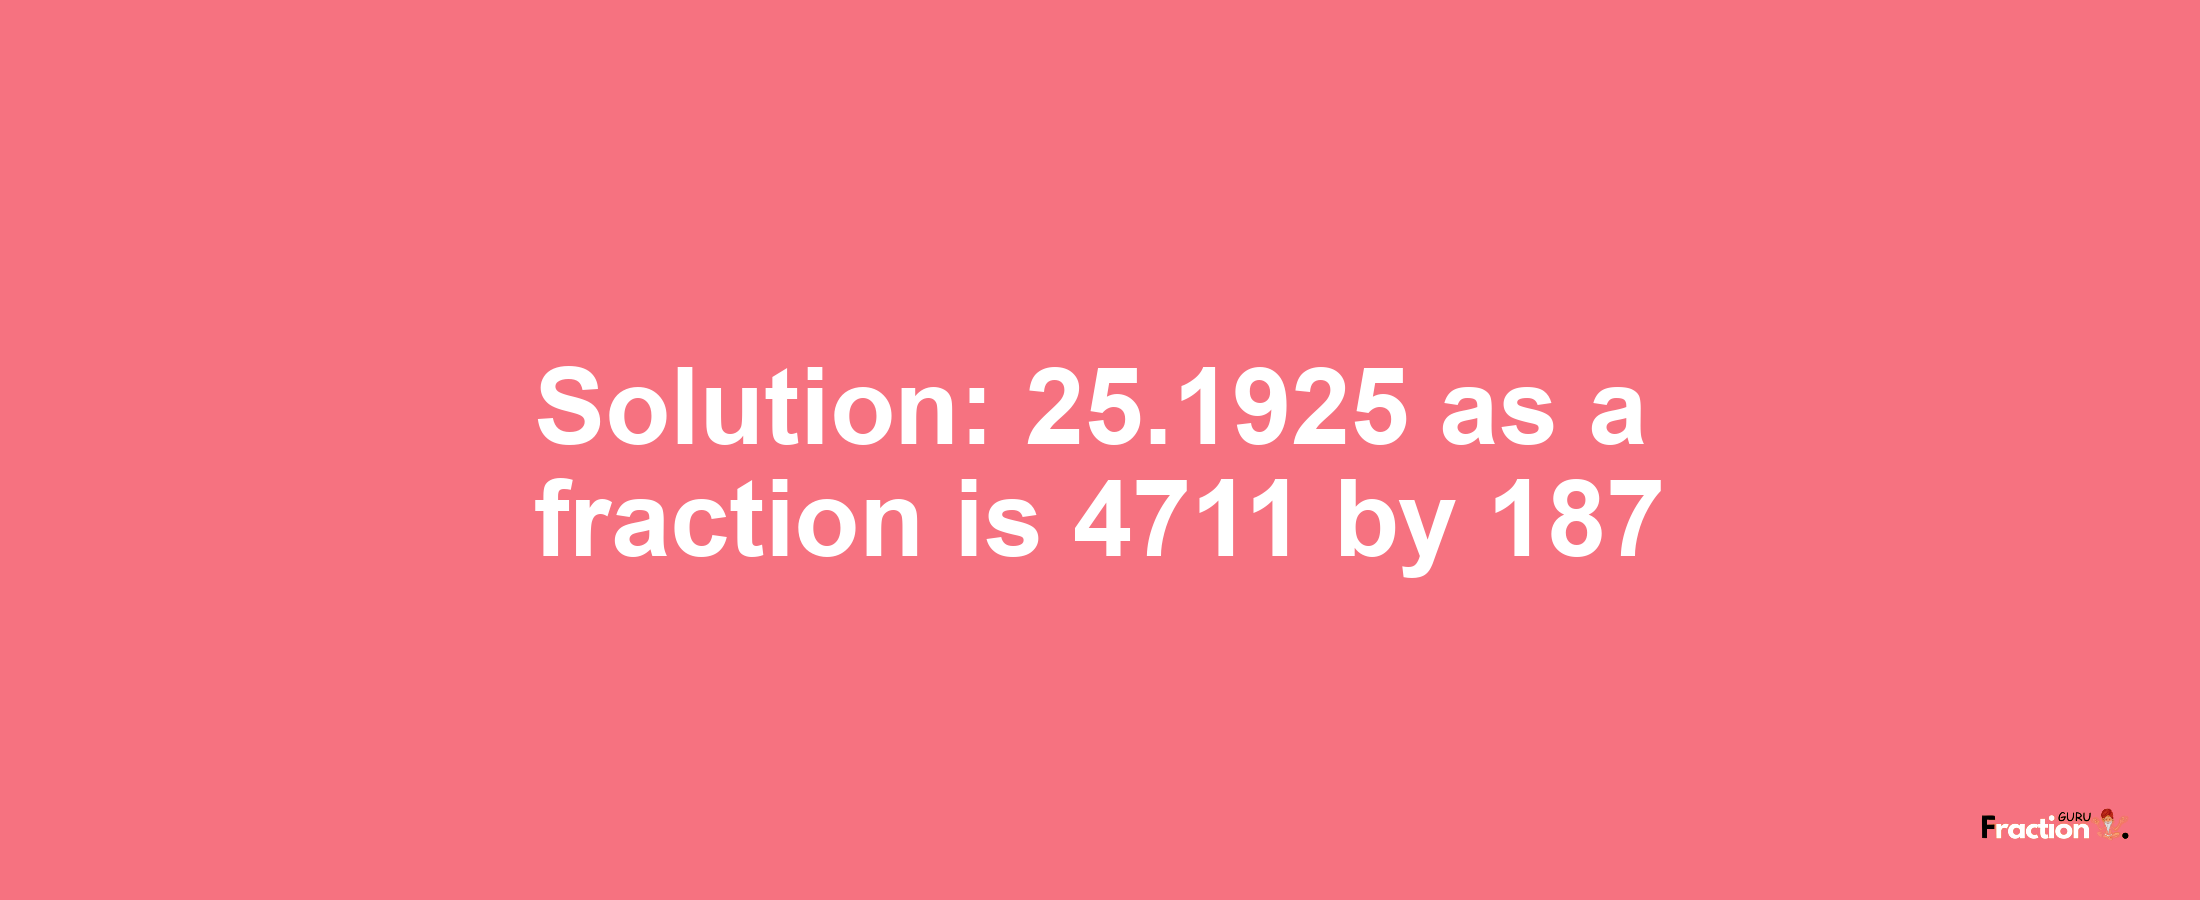 Solution:25.1925 as a fraction is 4711/187